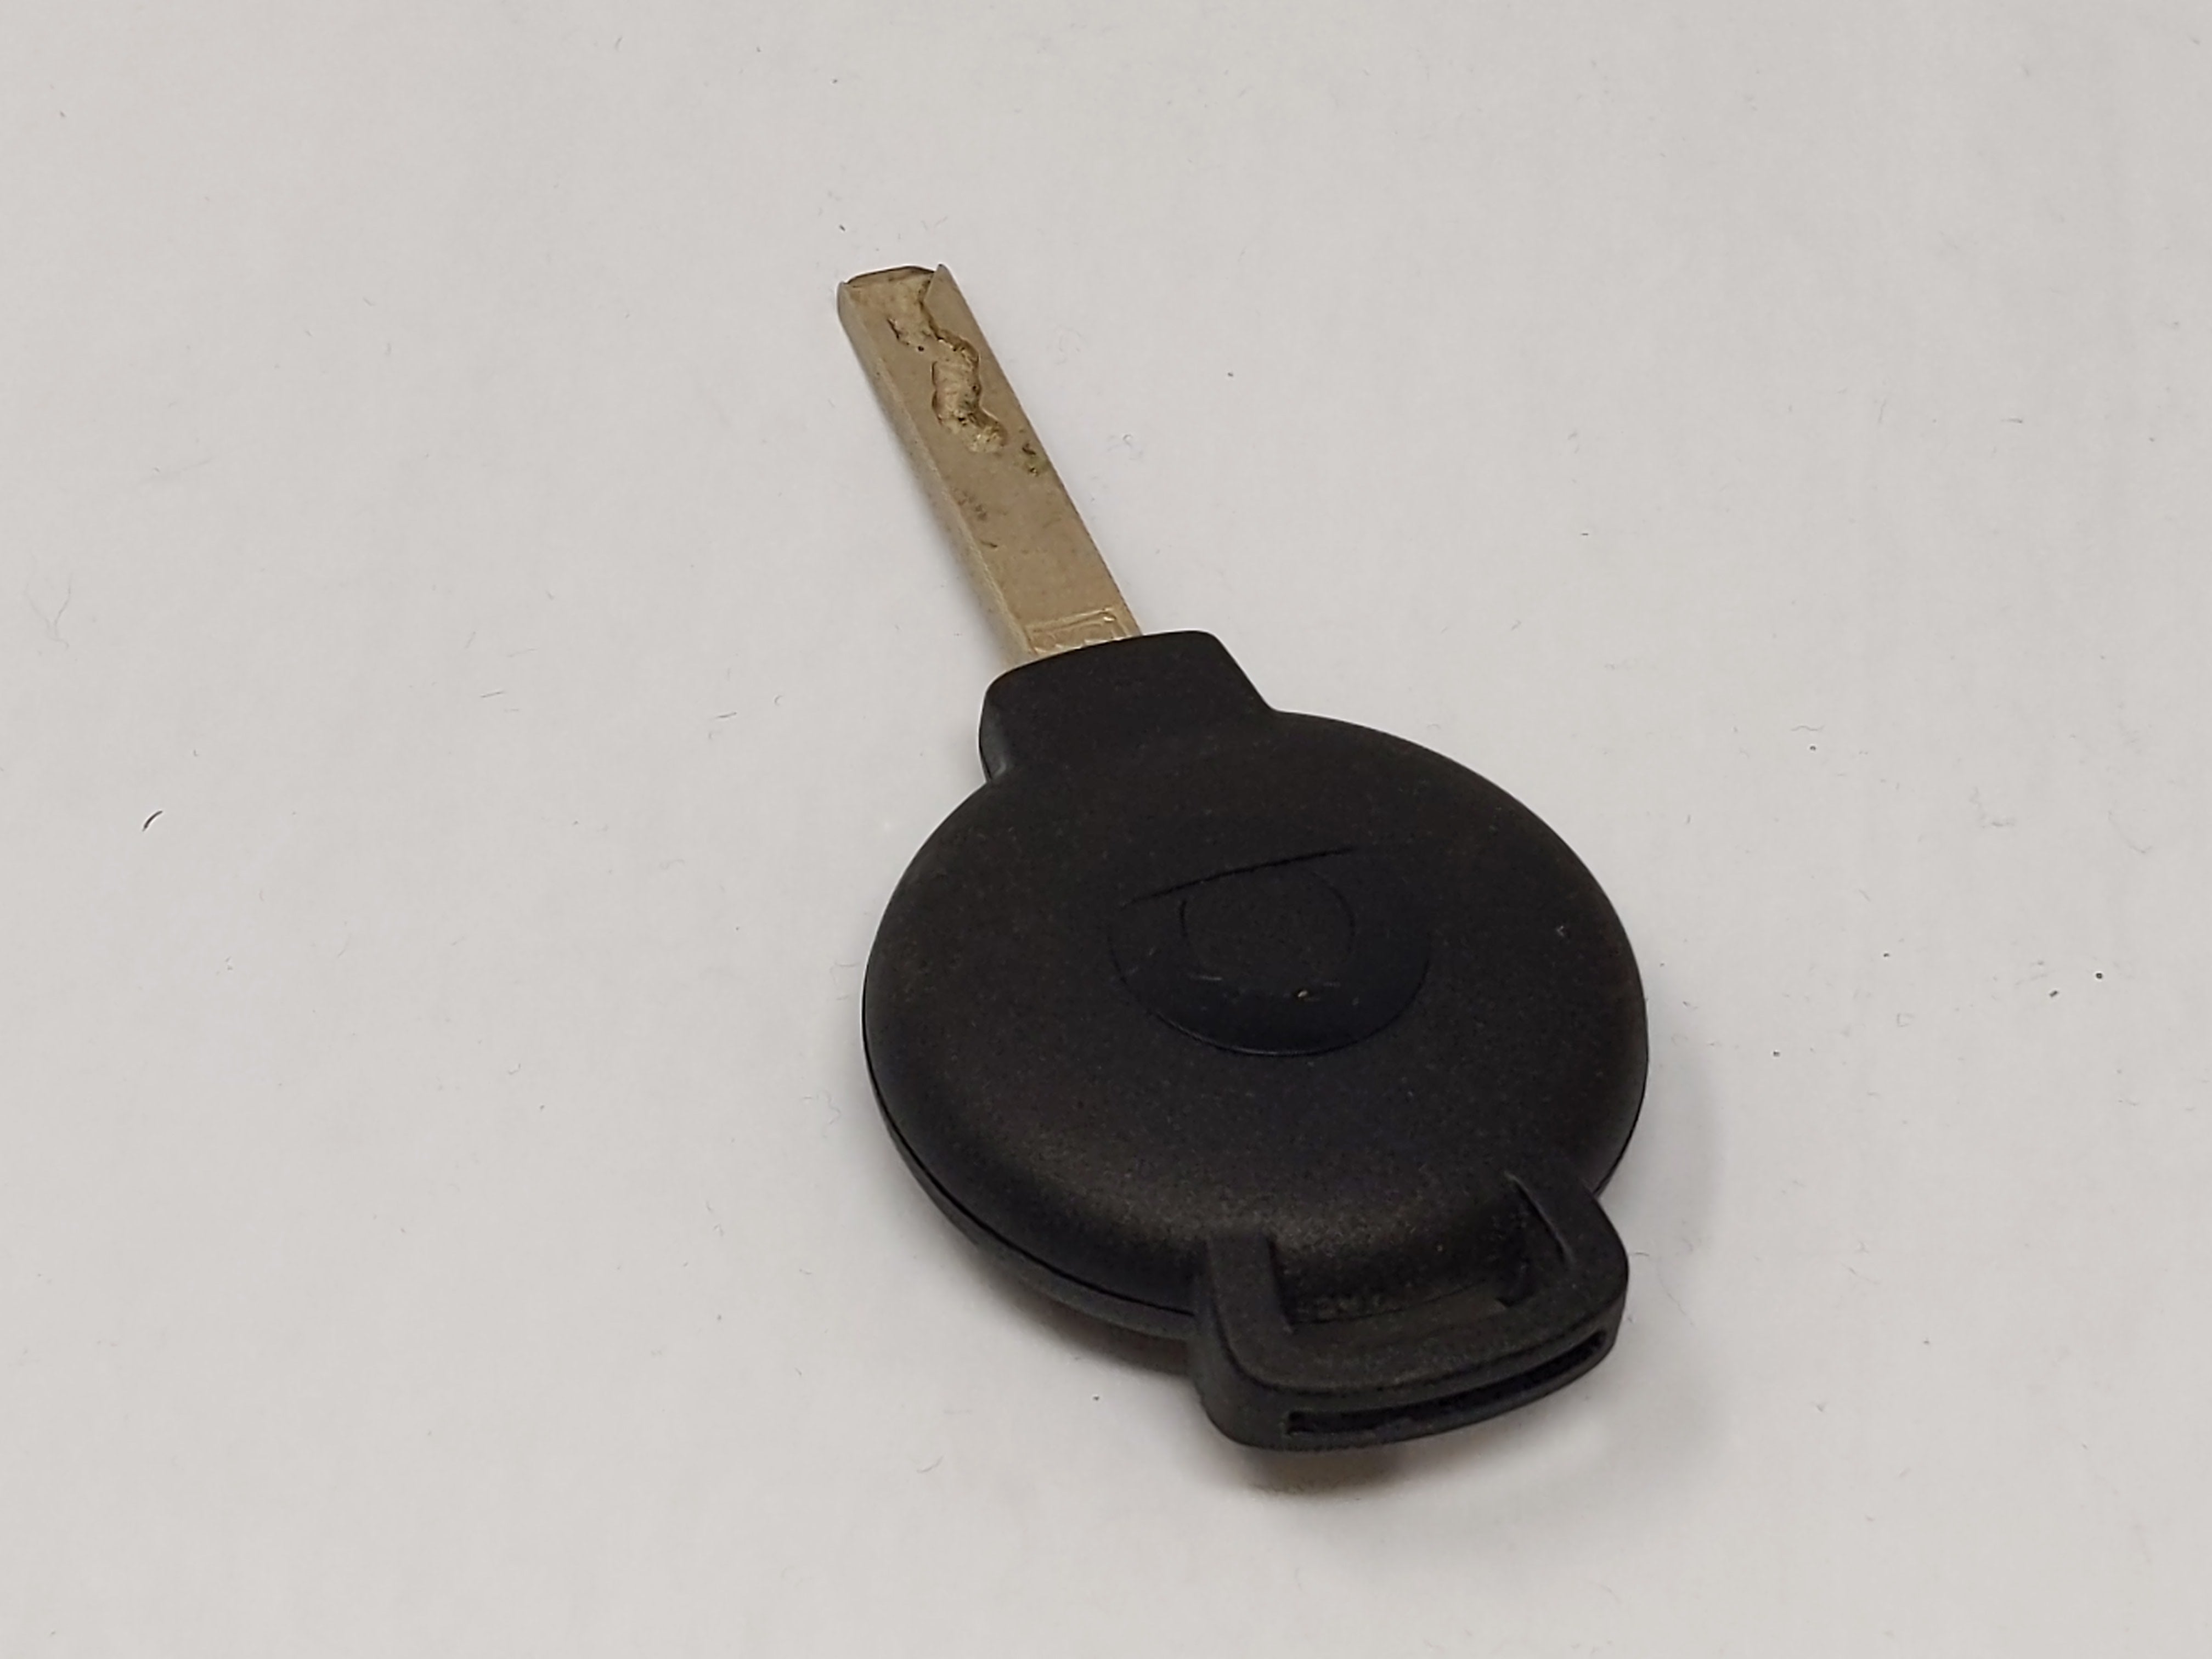 2005-2015 Smart Fortwo Keyless Entry Remote Kr55wk45144 267t-5wk45144 4 - Oemusedautoparts1.com